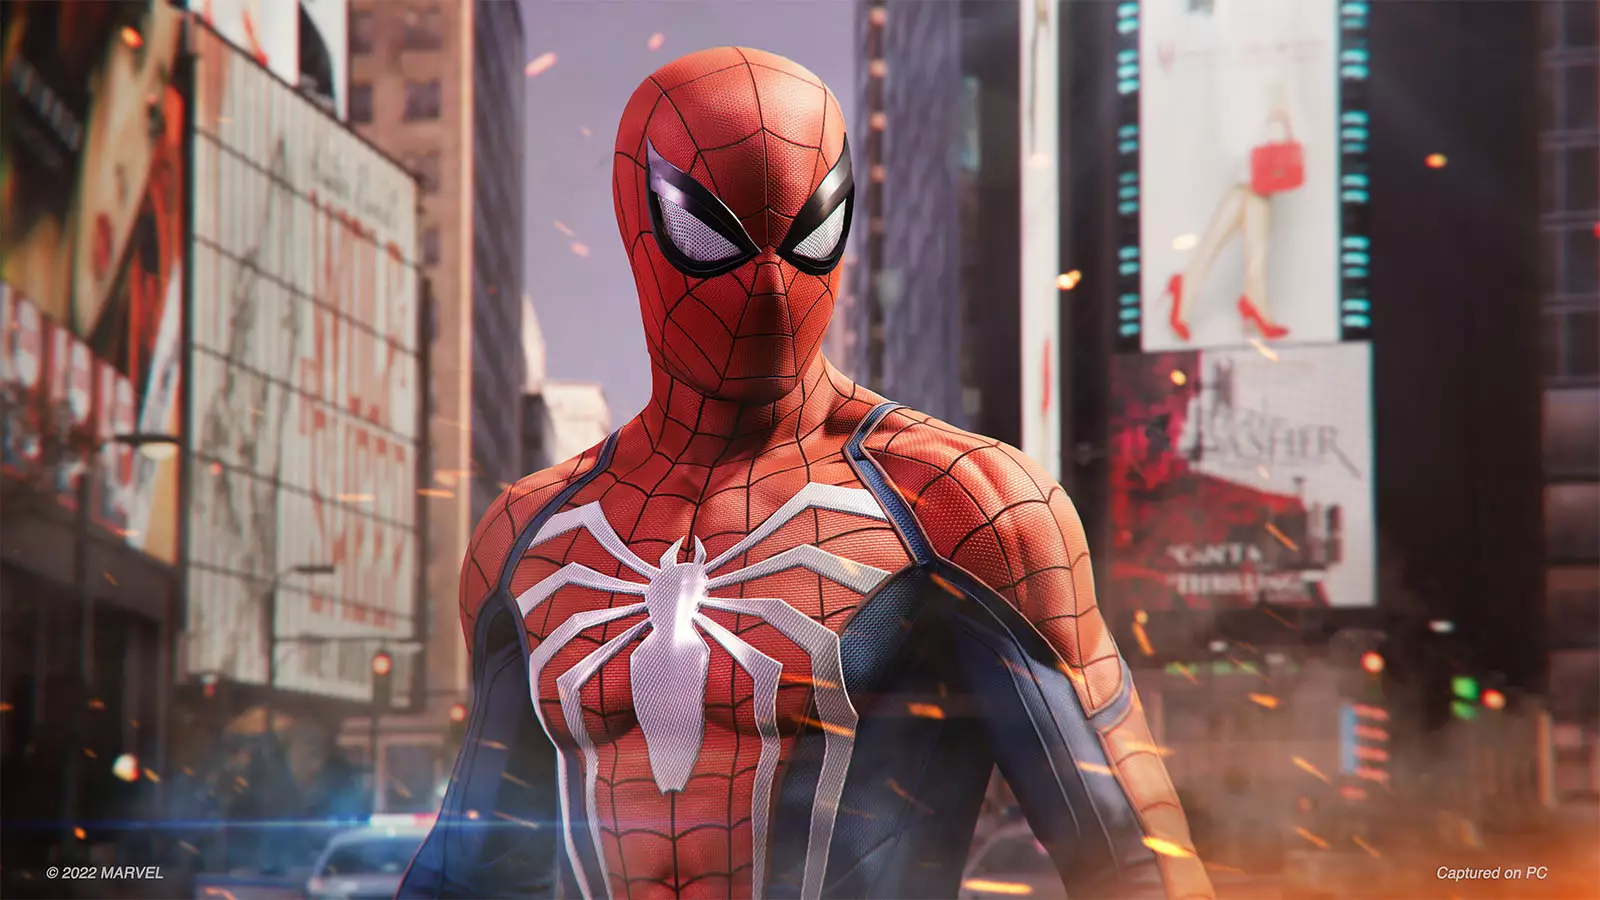 The Amazing Spider-Man 2 GAMEPLAY PC - Lets Play - Gamesplanet.com